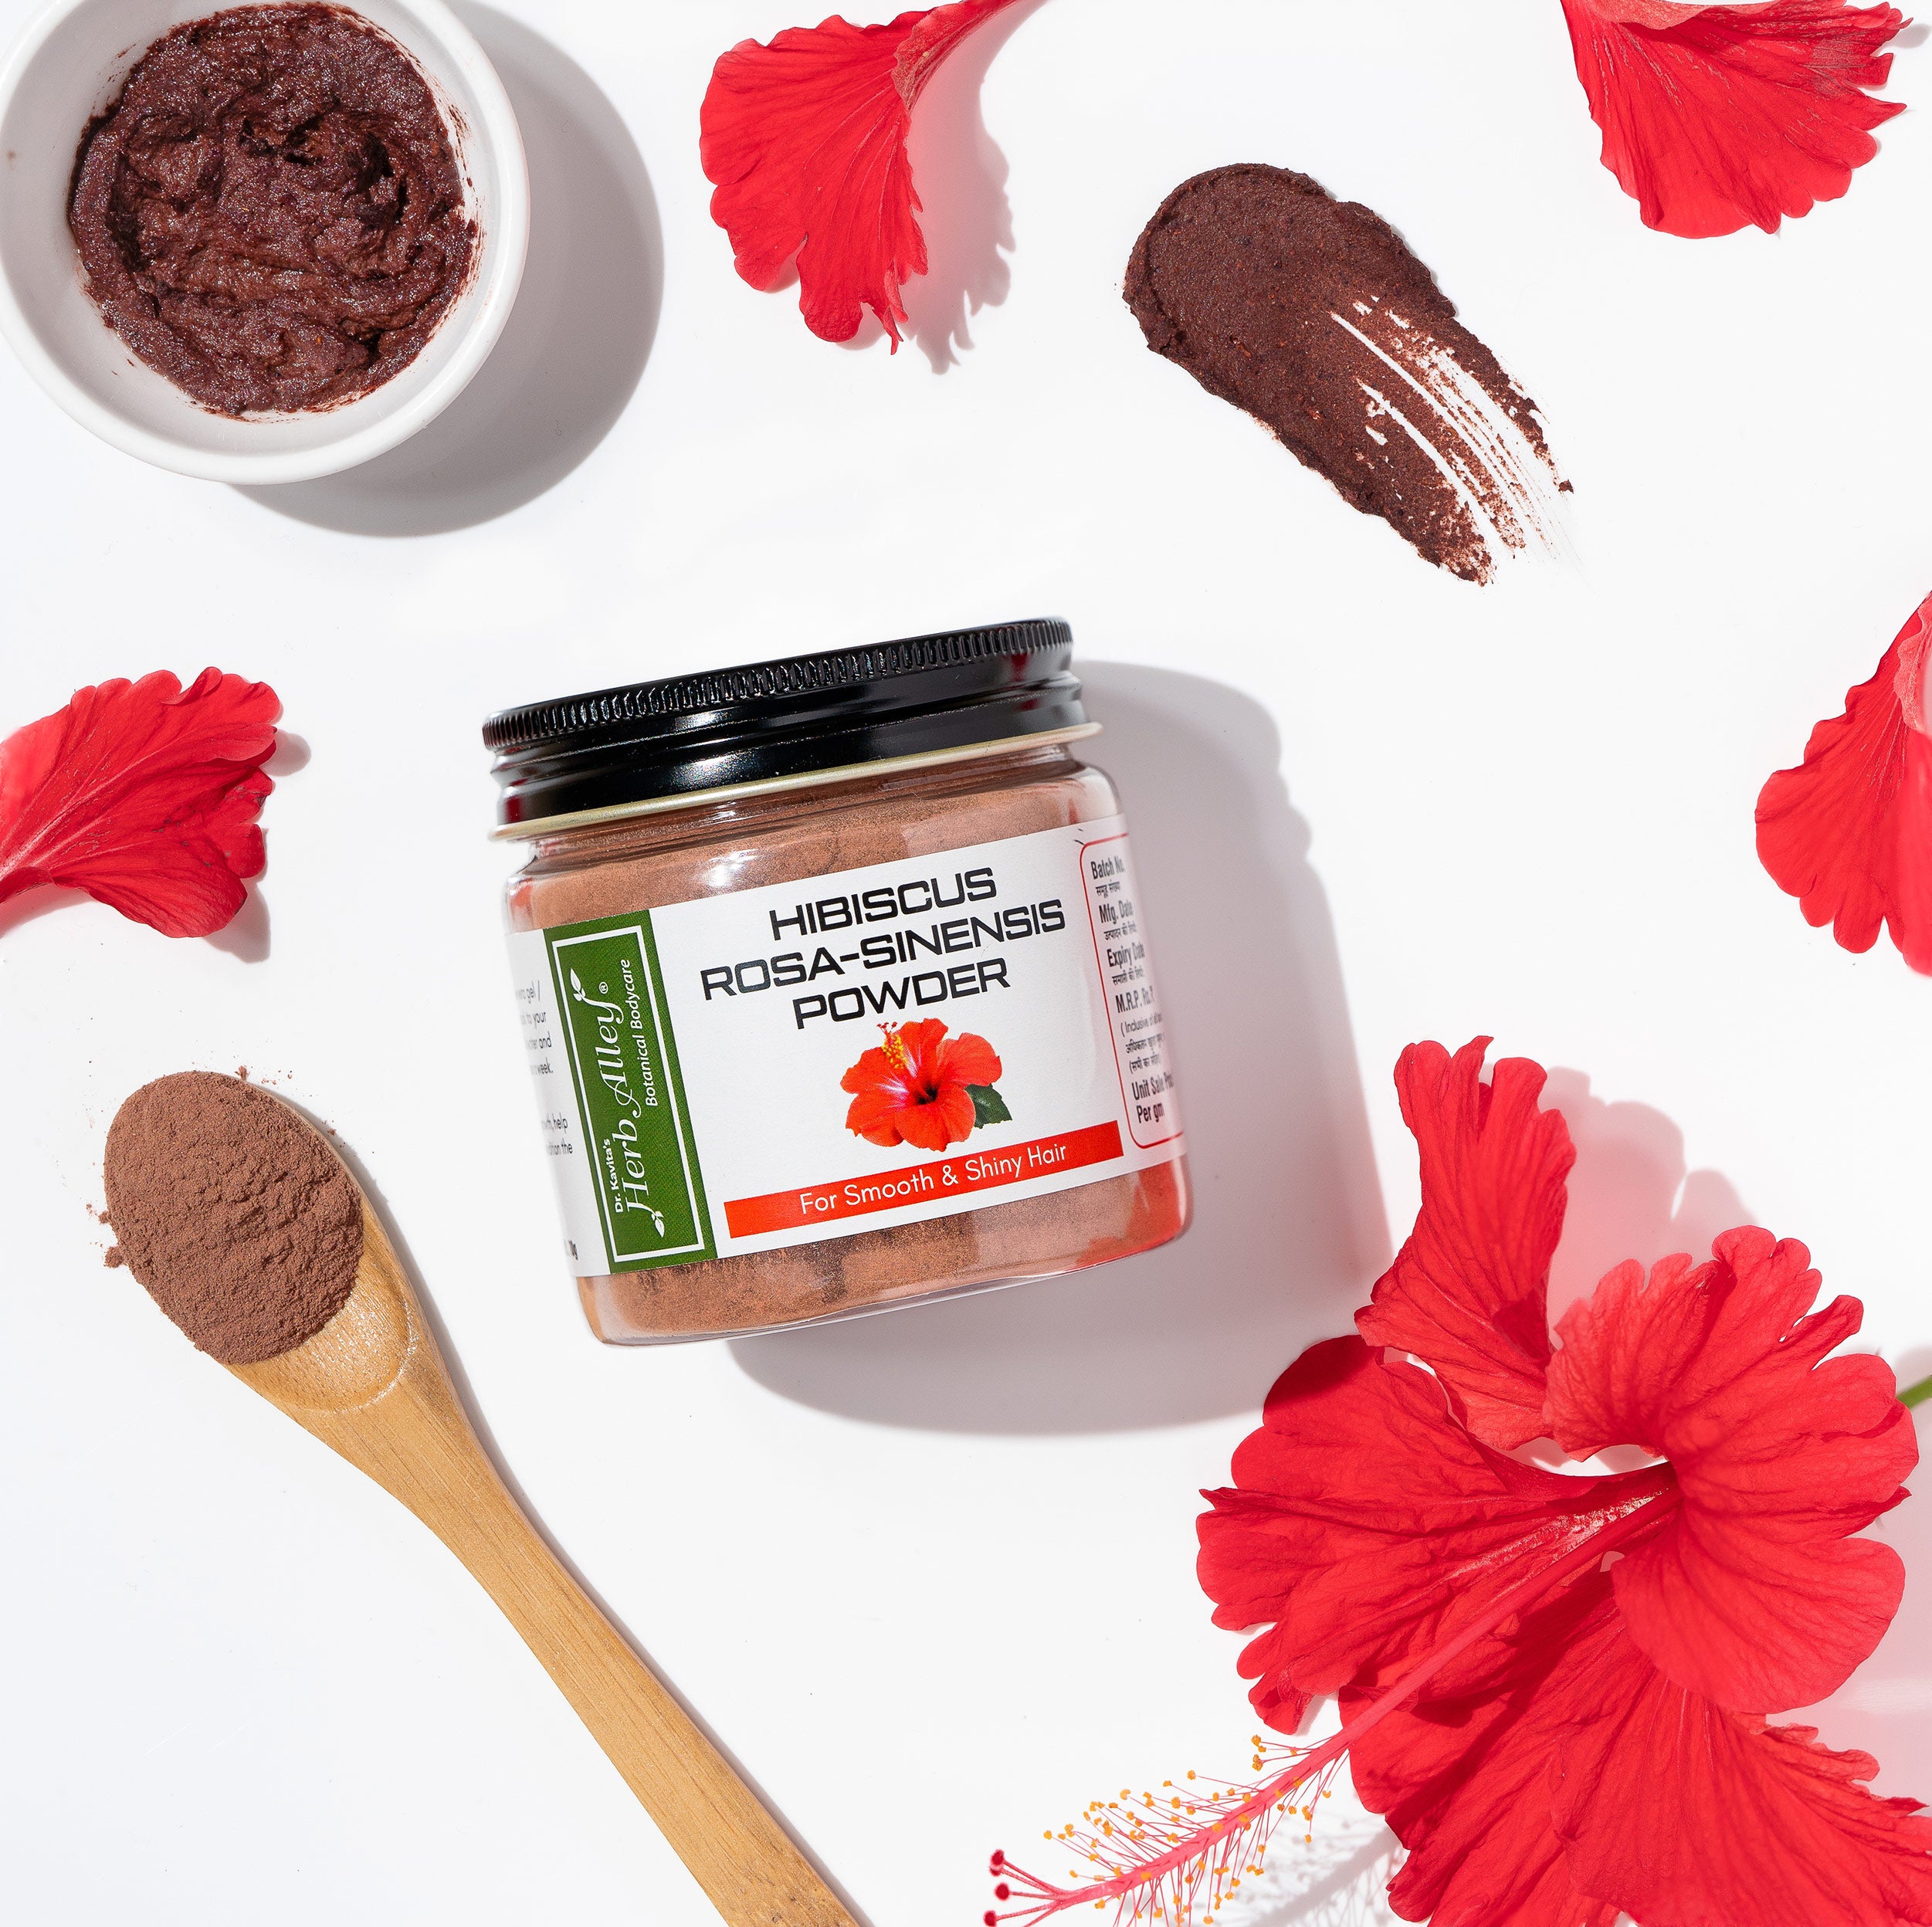 Hibiscus Powder for Smooth Hair